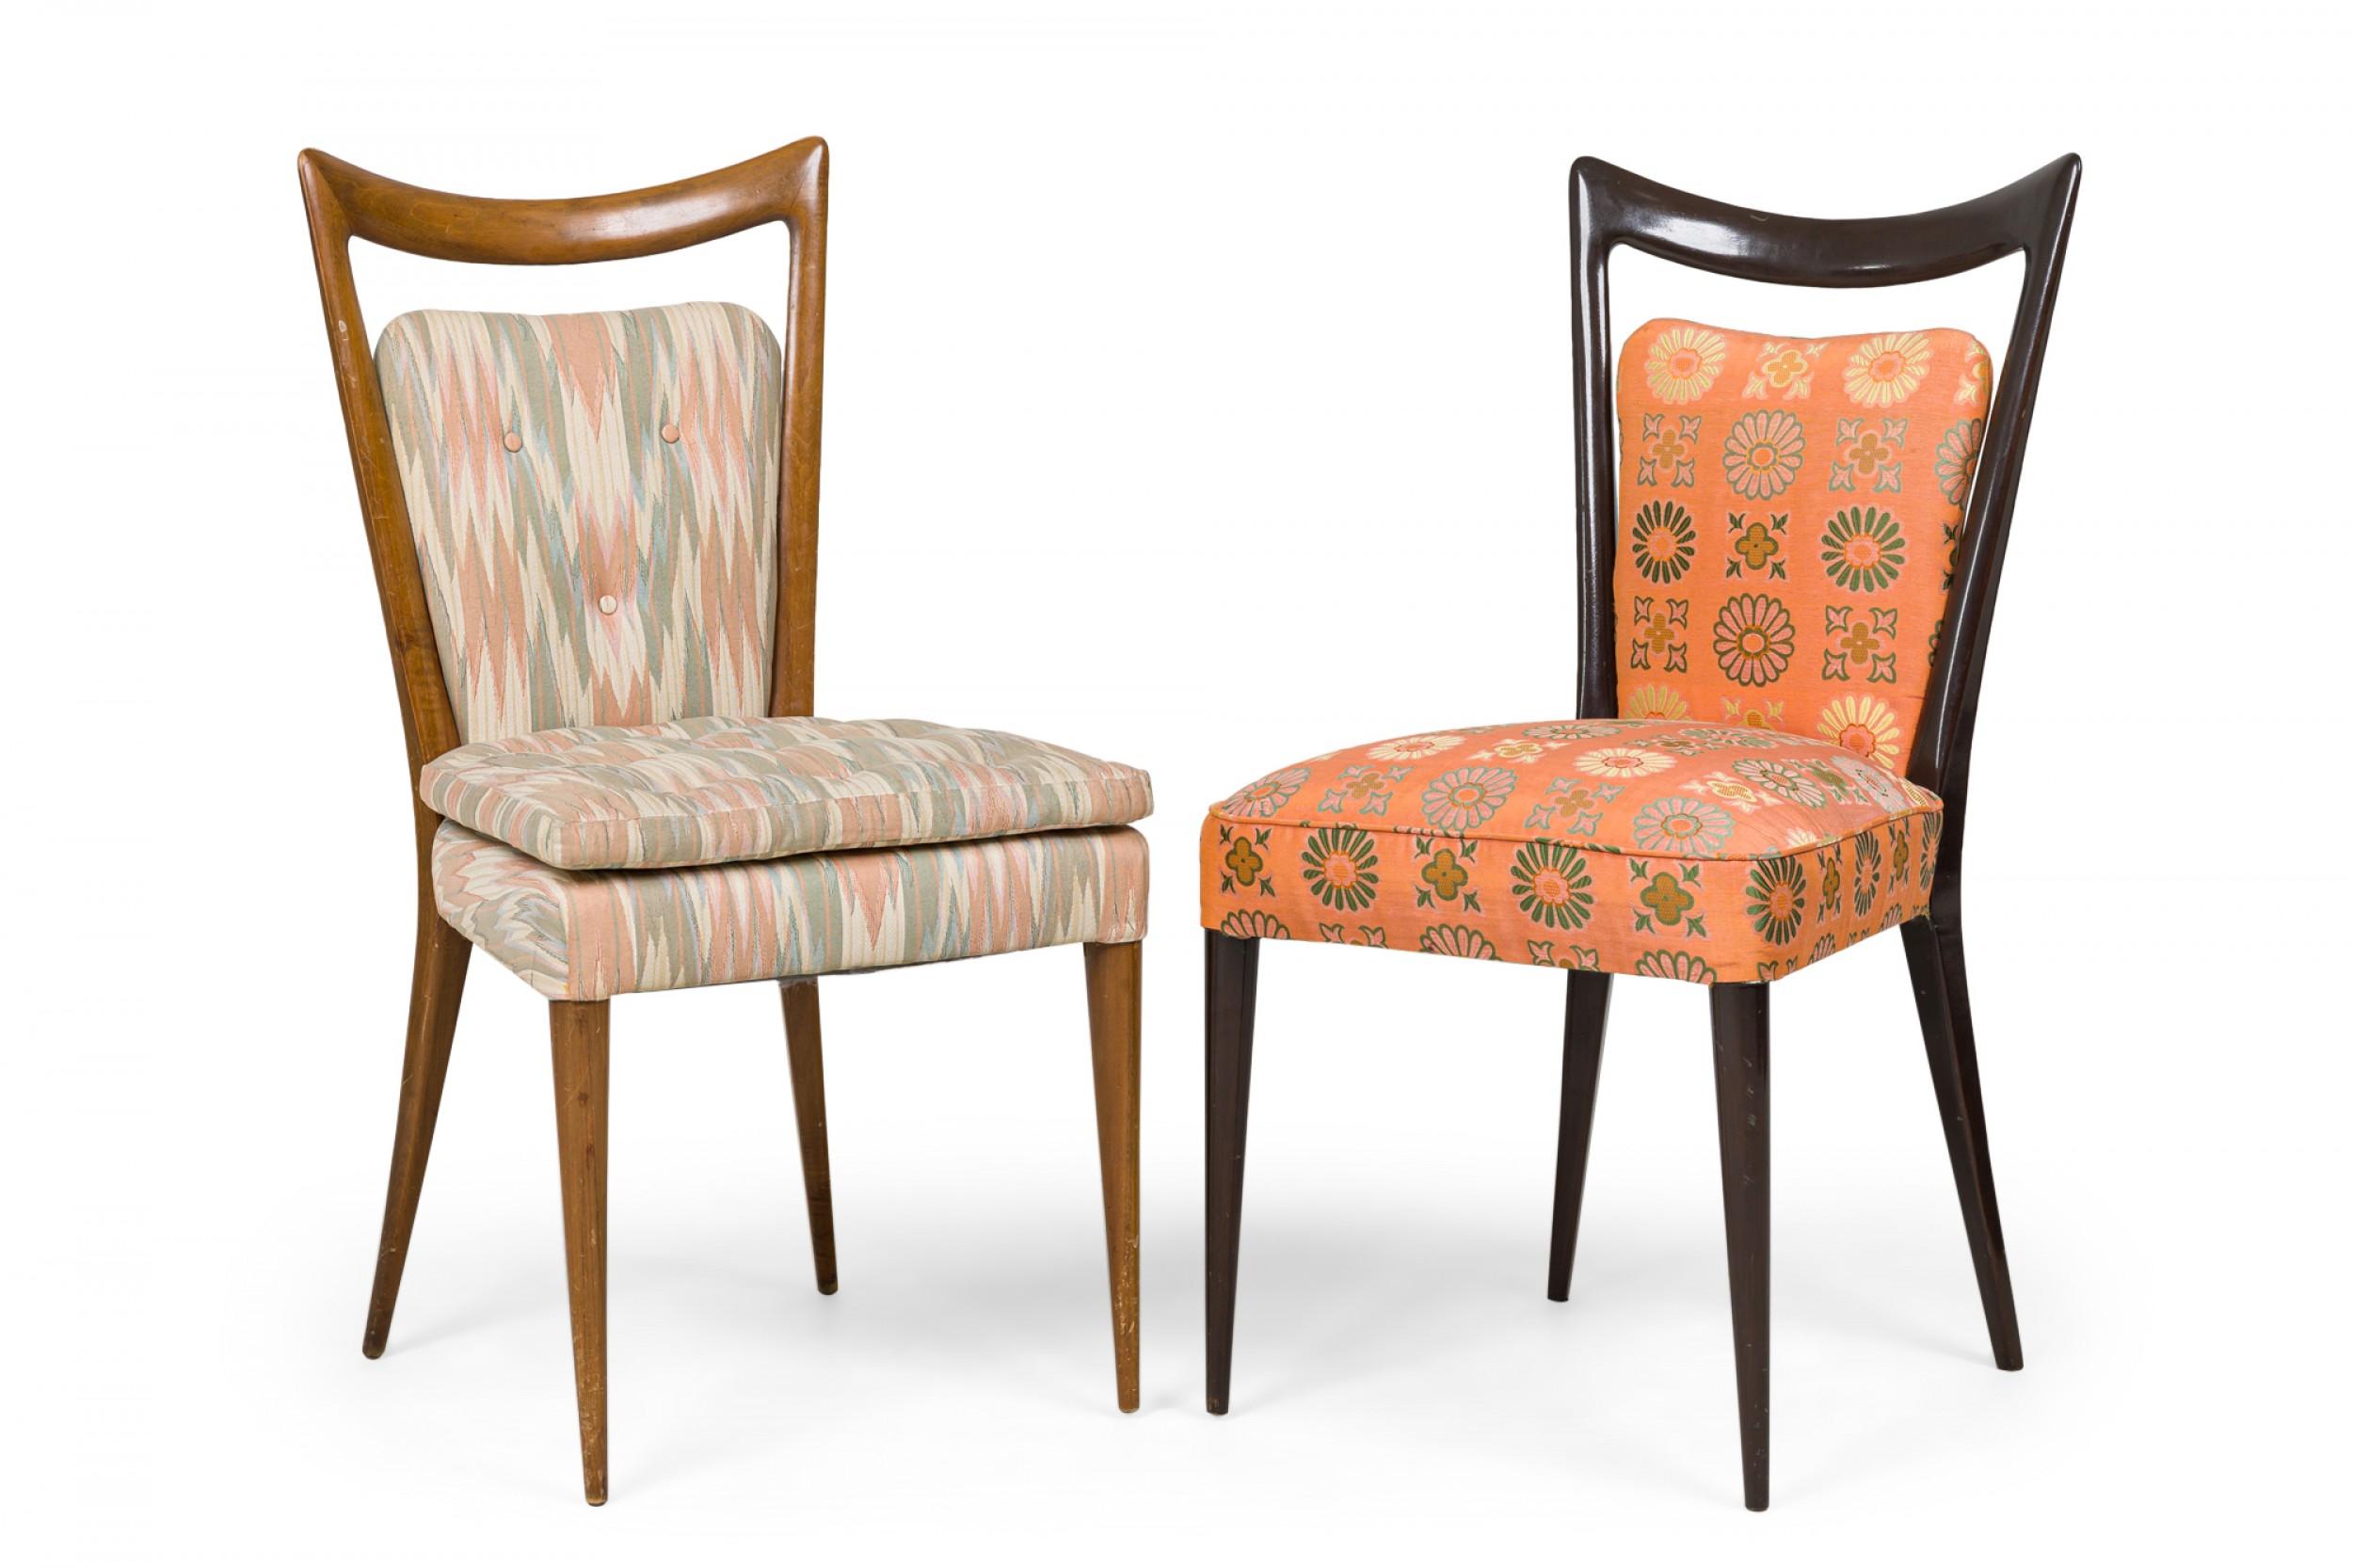 SET of 6 midcentury (1950s) Italian dining chairs with molded backs and double-padded seat cushions, upholstered in a button tufted pastel zigzag patterned fabric. (Melchiorre Bega) (PRICED AS SET) (Similar set of 4 chairs: REG4090A).